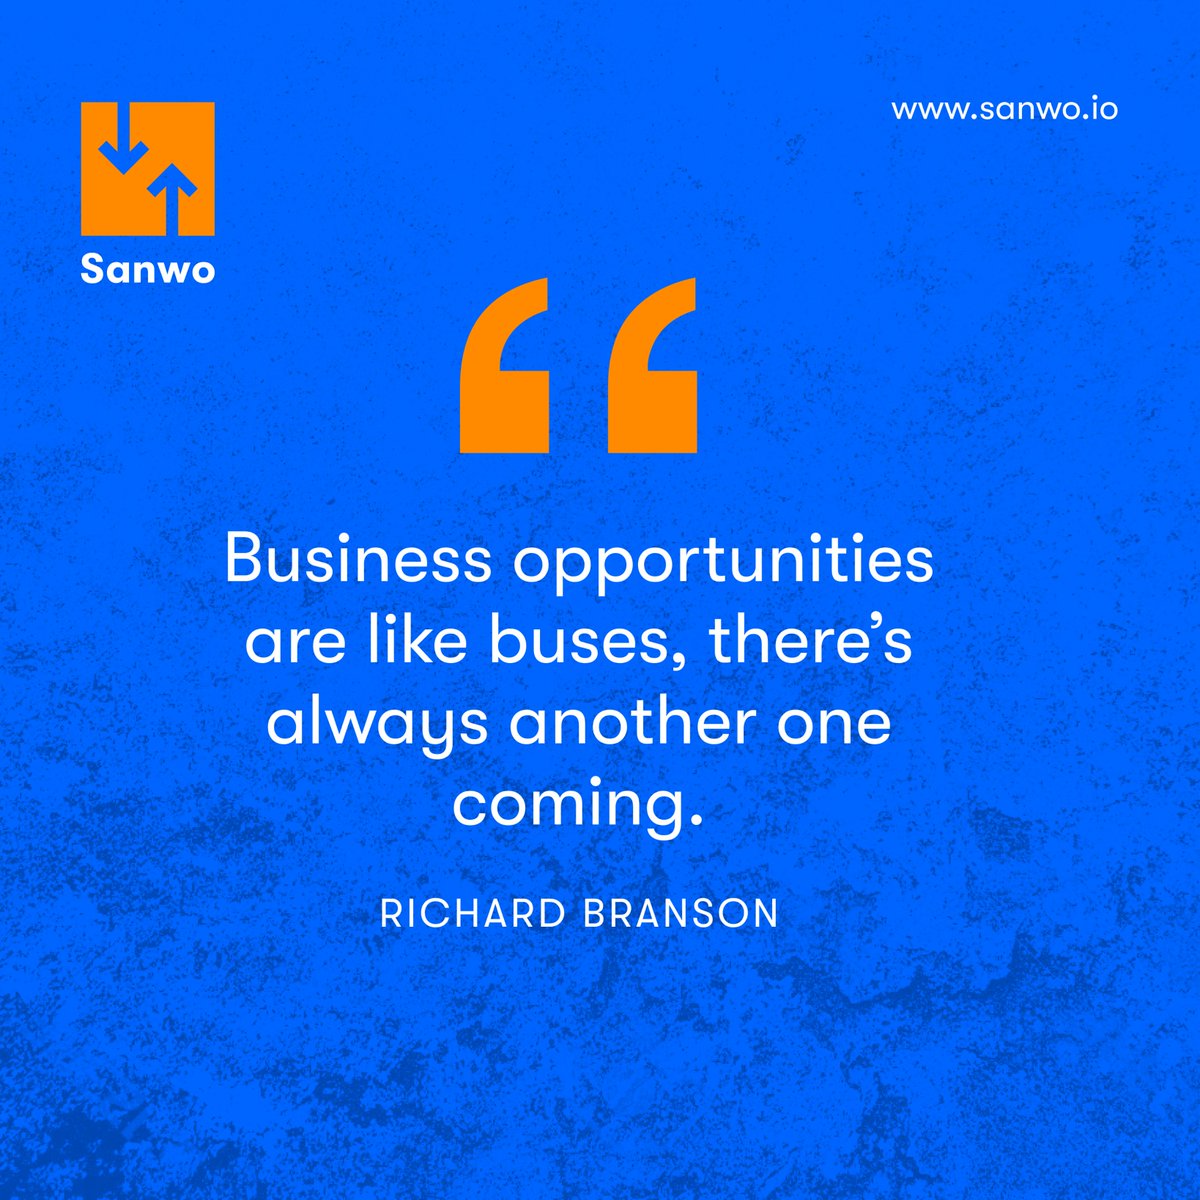 Missed an opportunity recently?

Don't get too sad about it. Another will come soon.

Take time to prepare yourself for the next big opportunity instead. The future is bright. 🤗

#sanwo #sanwoapp #sanwoio #sanwofintech #sanwoescrow #monday #mondayquote #nigerianbusiness